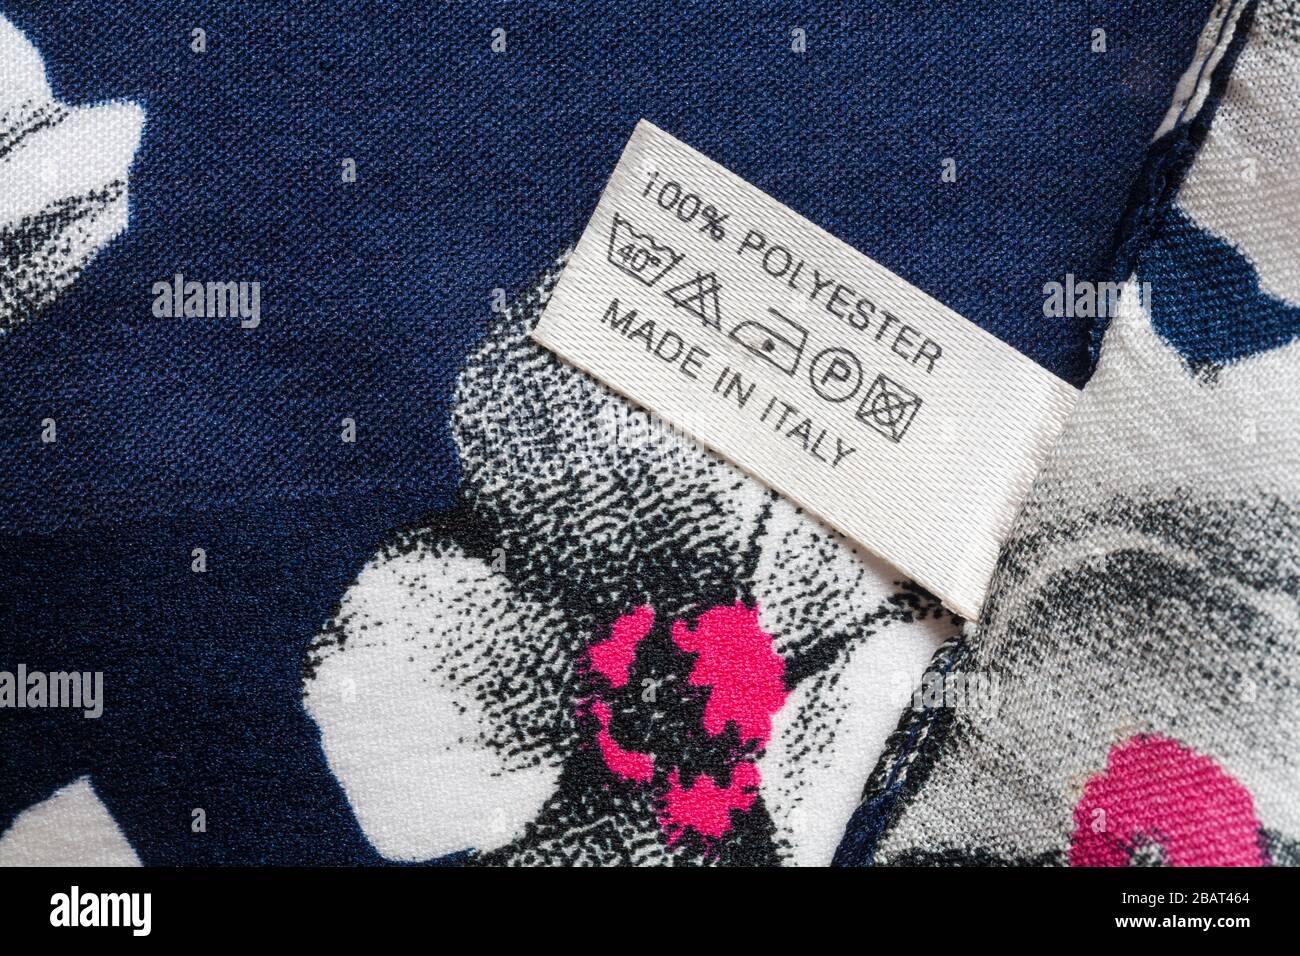 Label in woman's 100% polyester scarf made in Italy with care wash symbols - sold in the UK United Kingdom, Great Britain Stock Photo